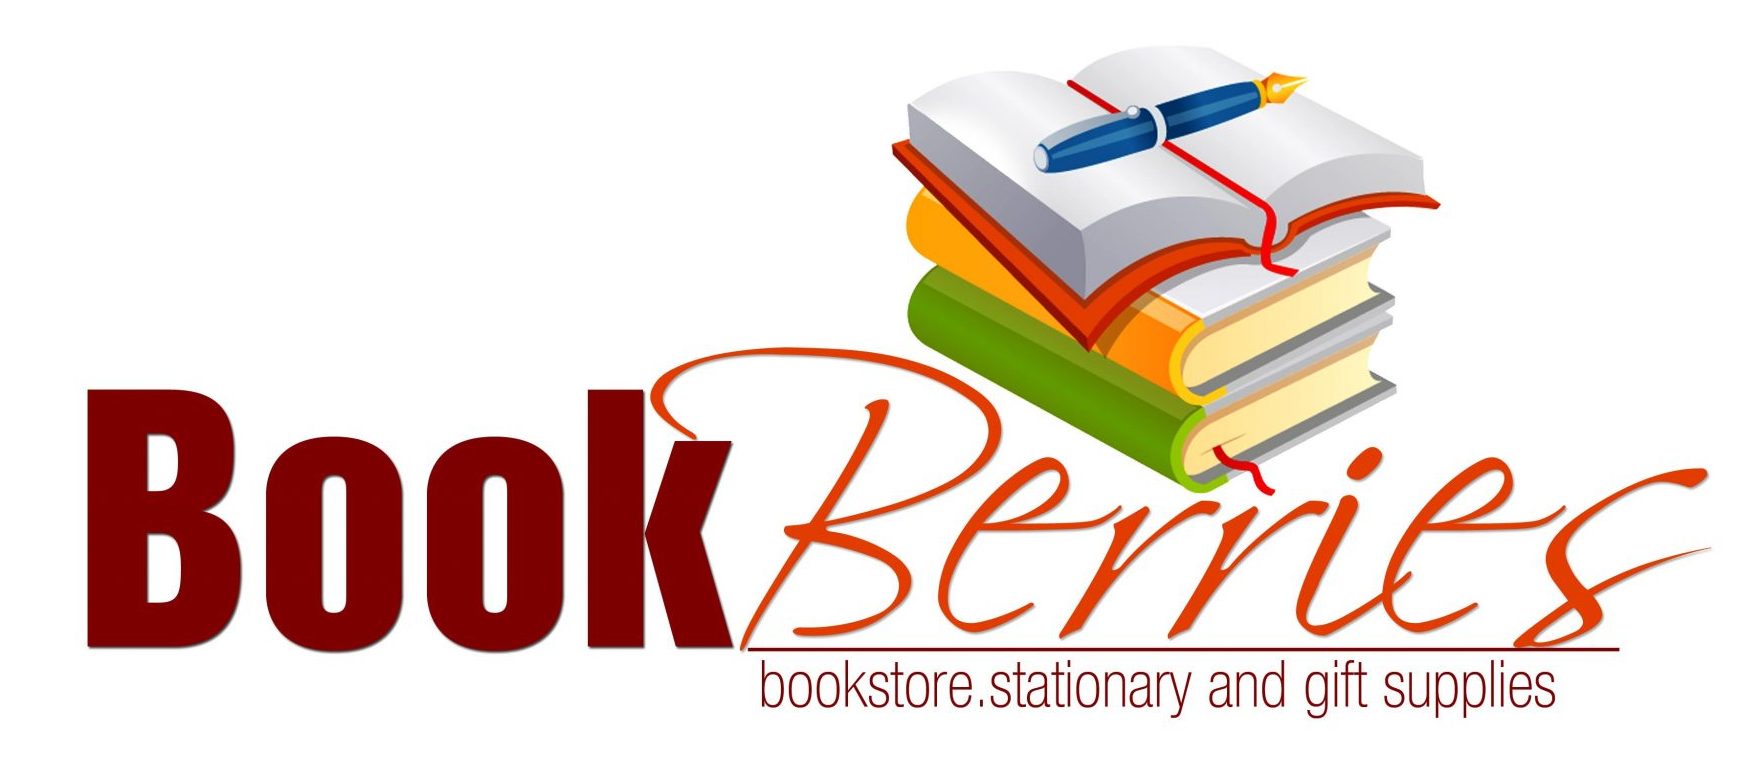 BookBerries Limited